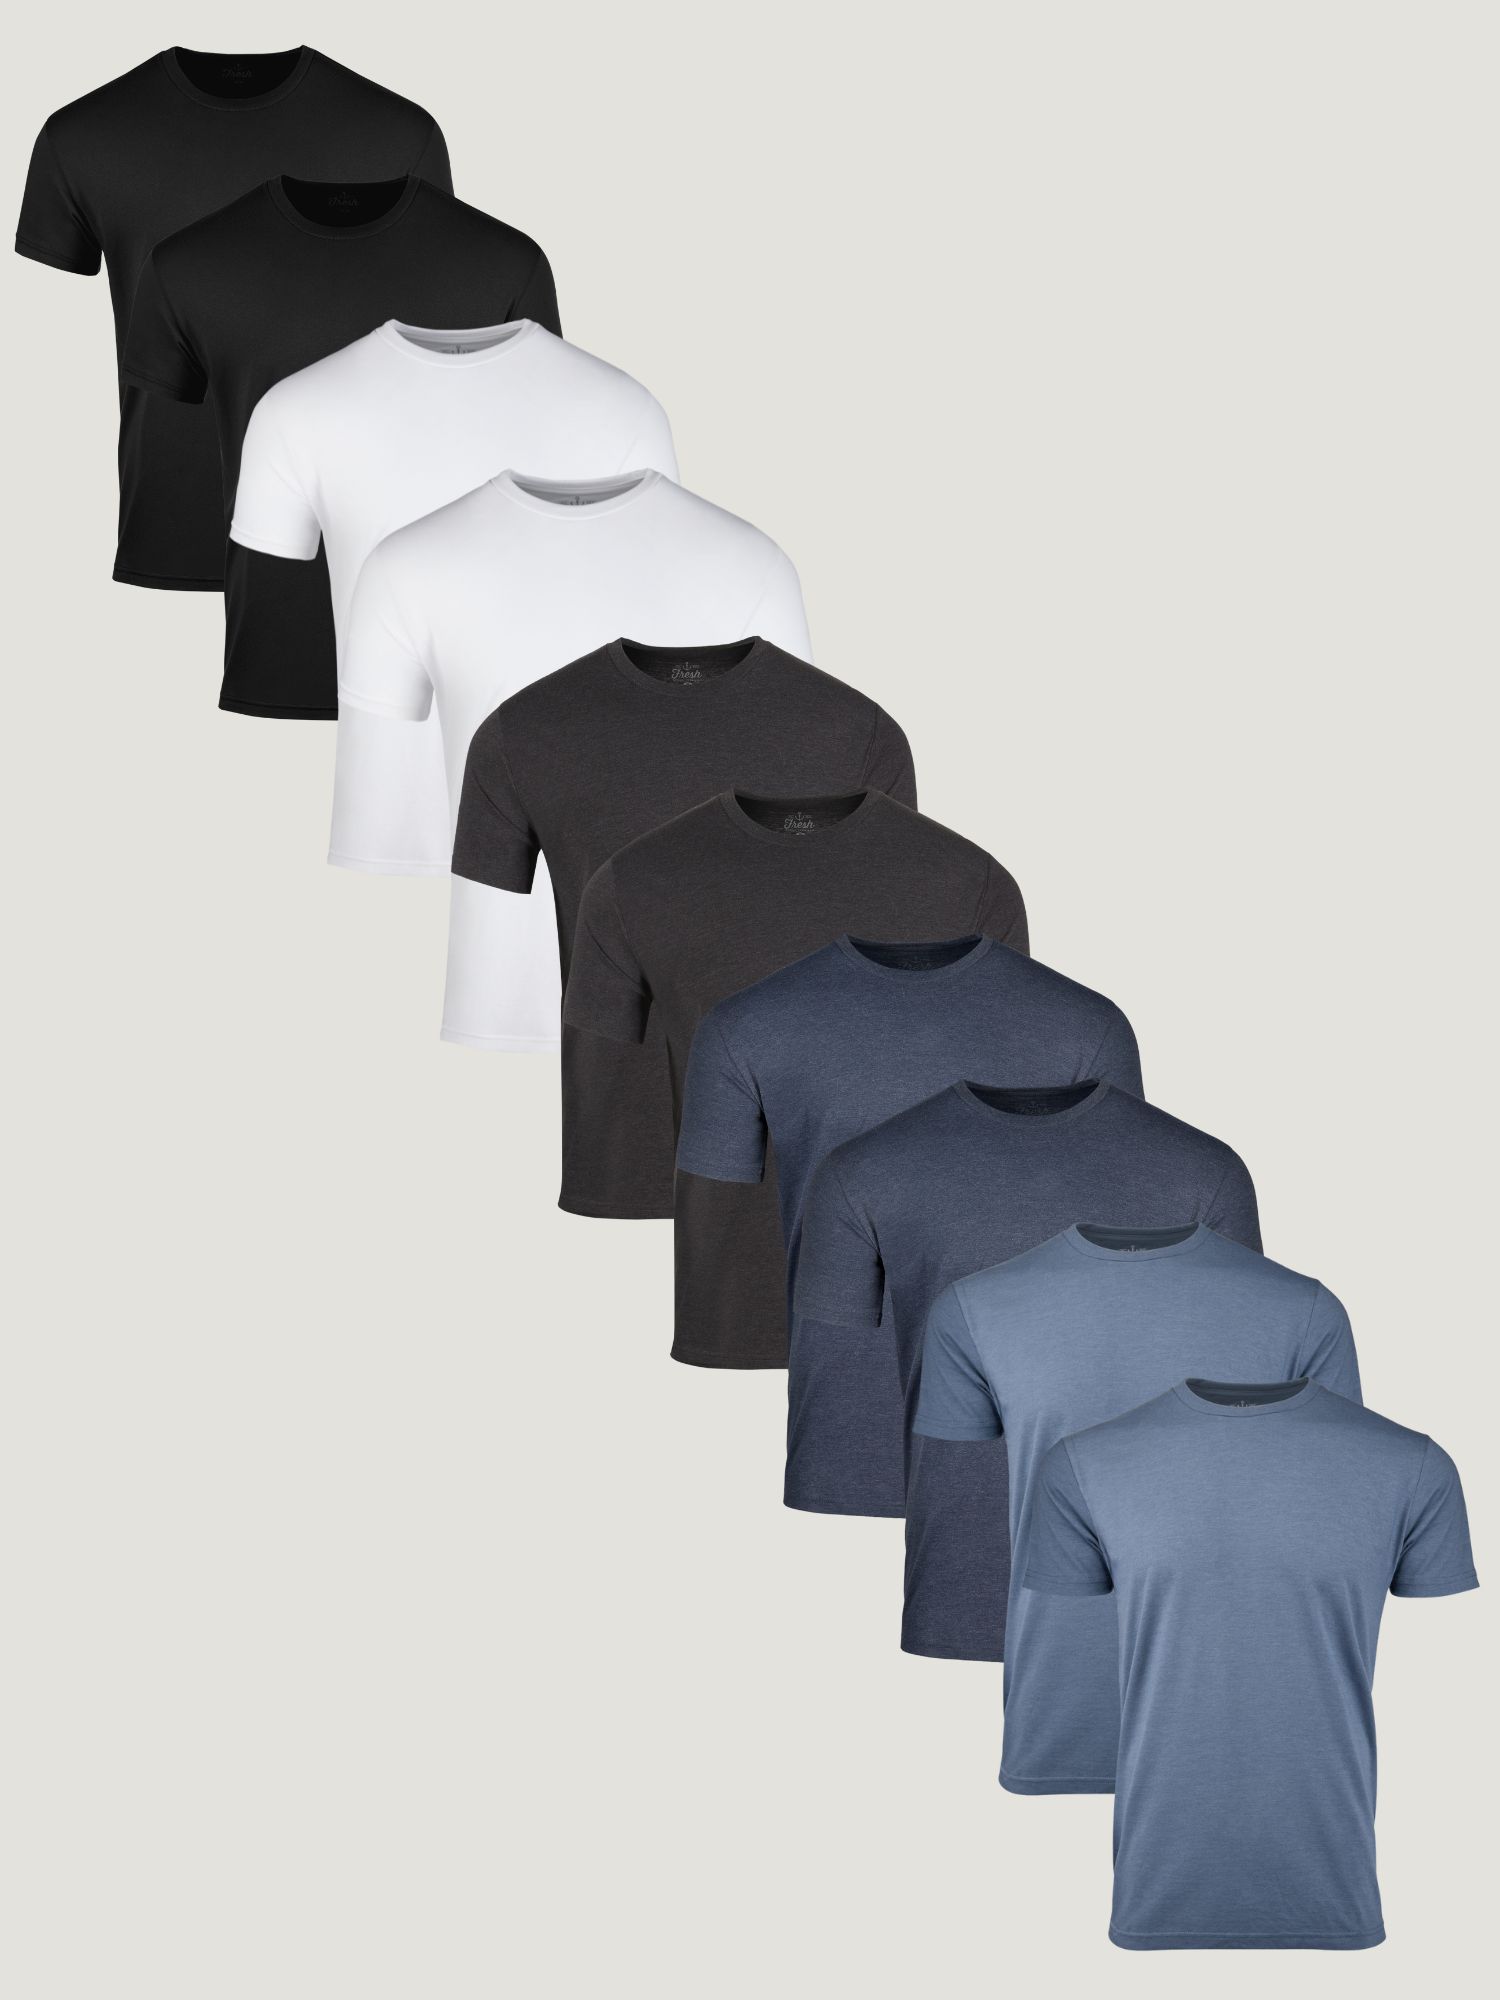 Fresh Clean Threads  Best High-Quality, Soft, Fitted T-Shirts for Men